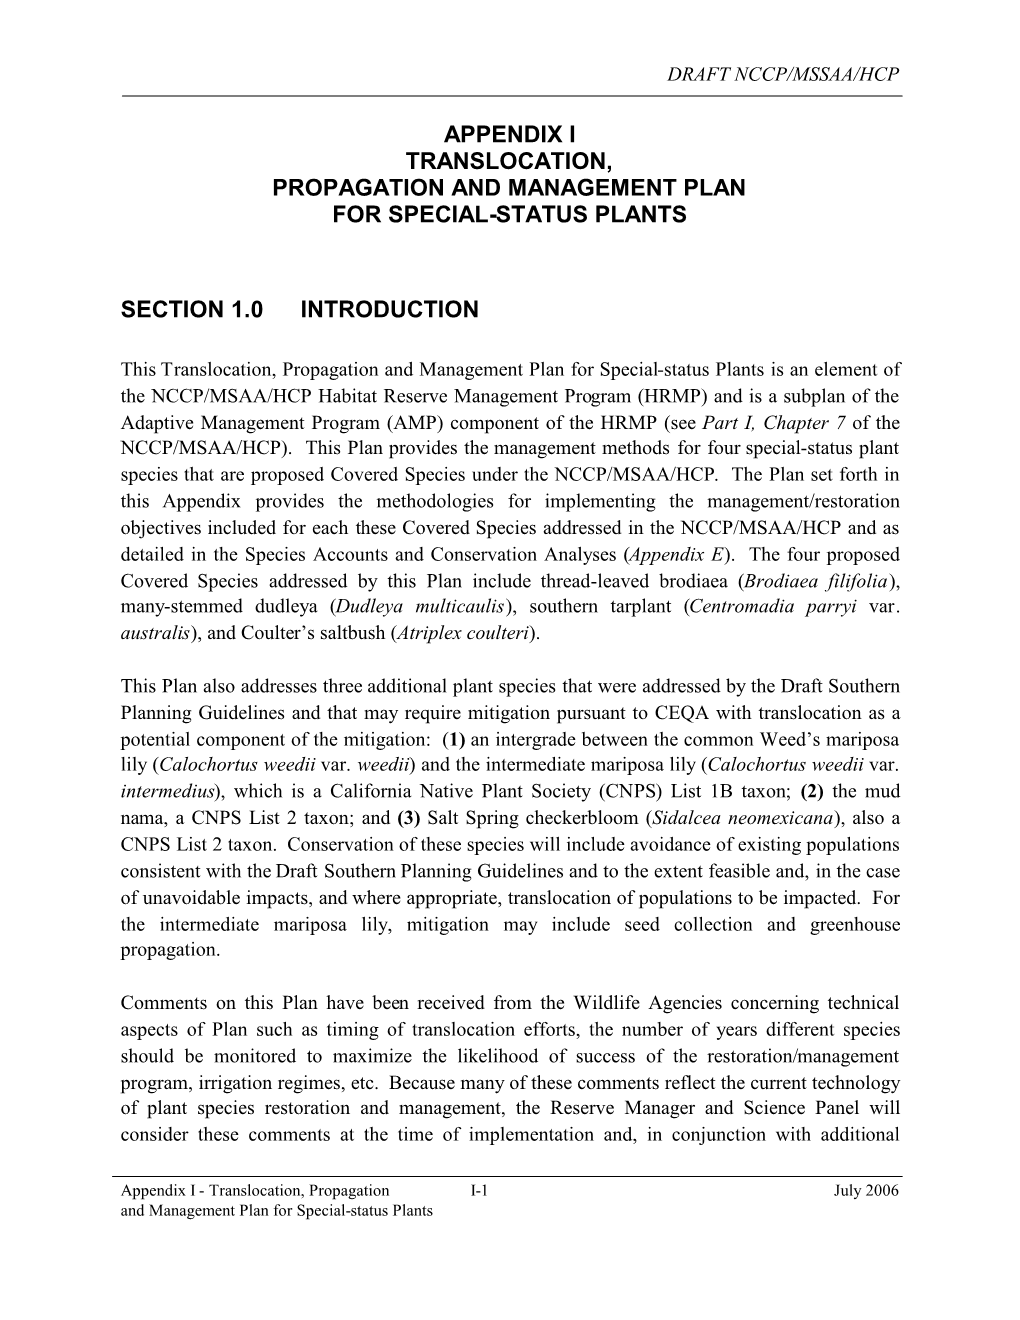 Appendix I Translocation, Propagation and Management Plan for Special-Status Plants Section 1.0 Introduction